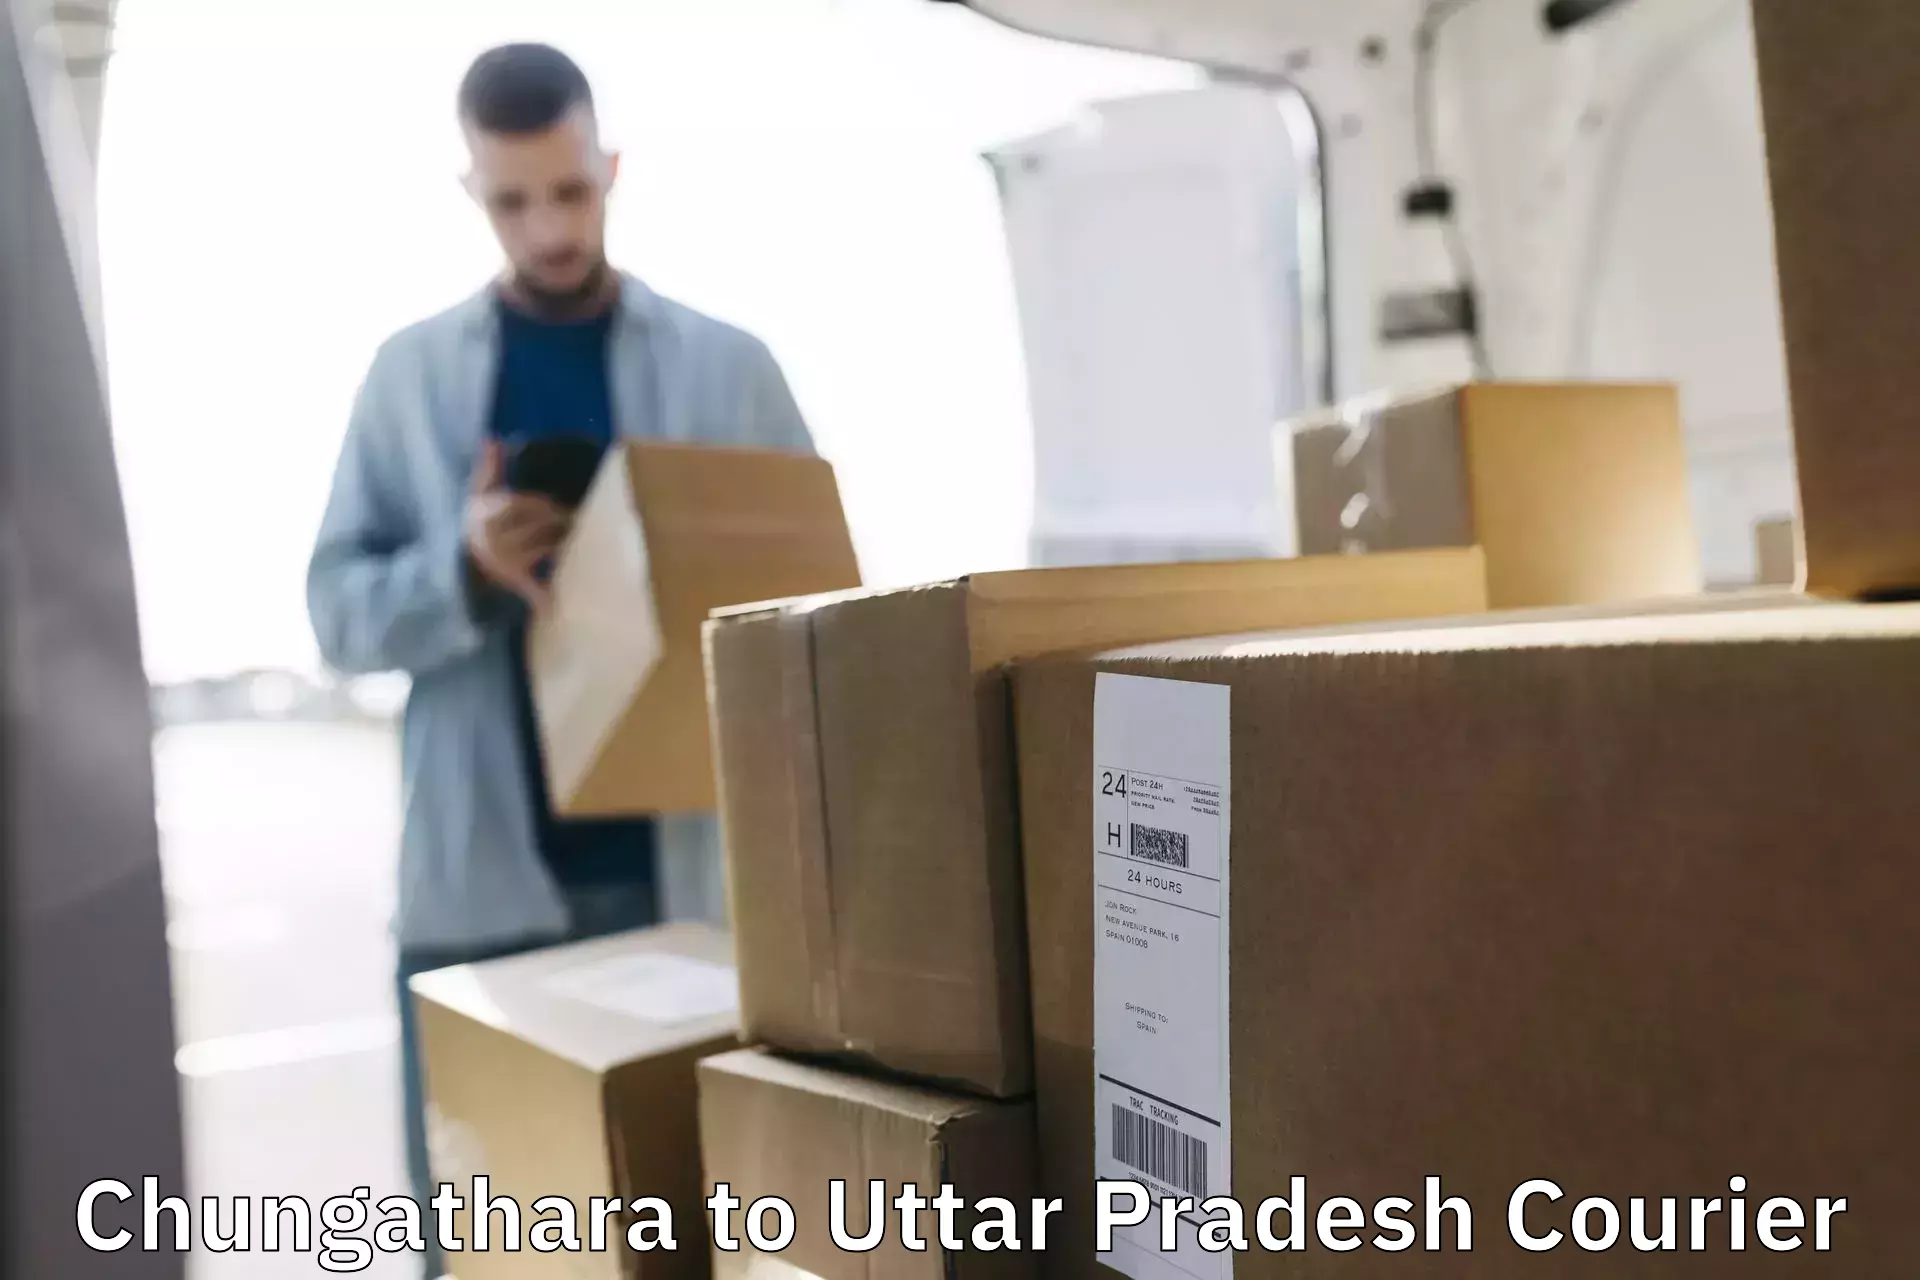 Premium courier services Chungathara to Unnao